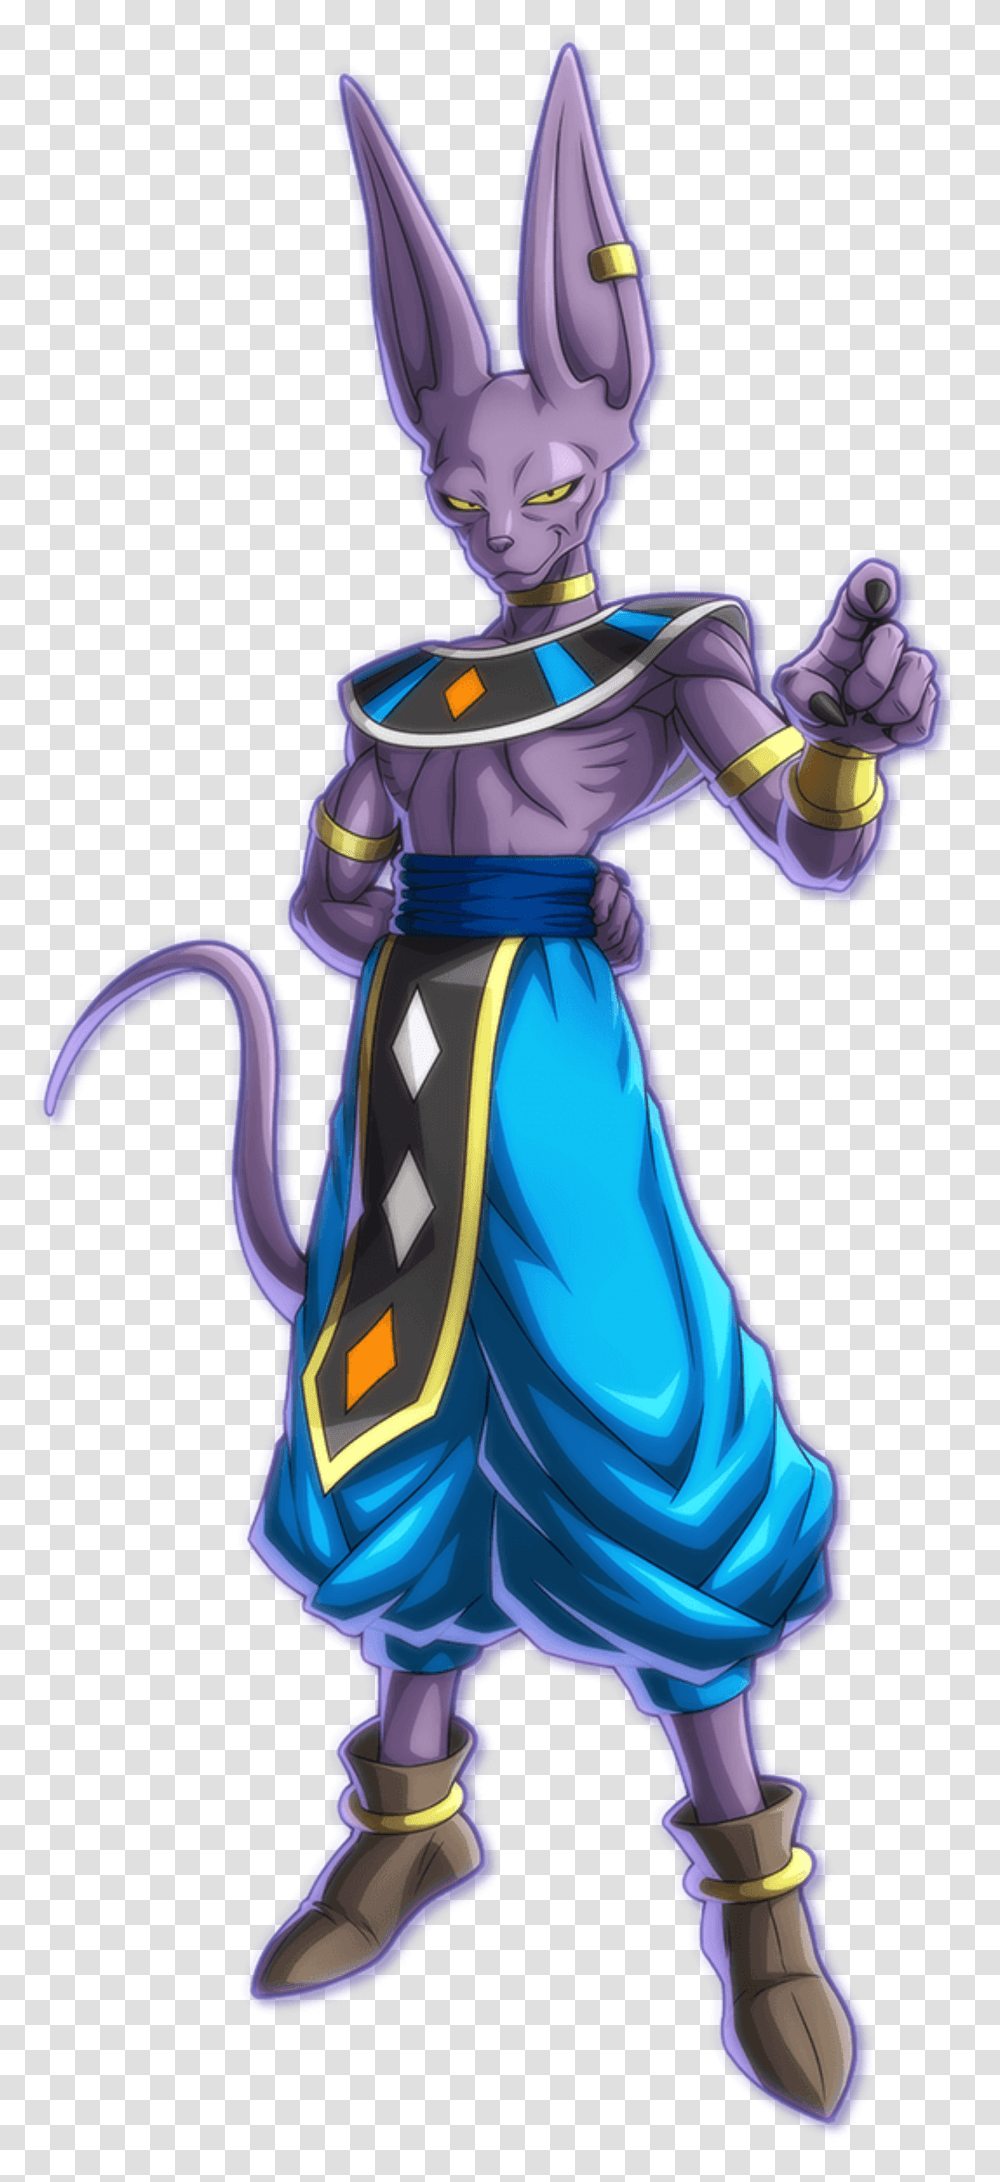 Dragon Ball Fighterz Image Dragon Ball Fighterz Beerus Transparent Png